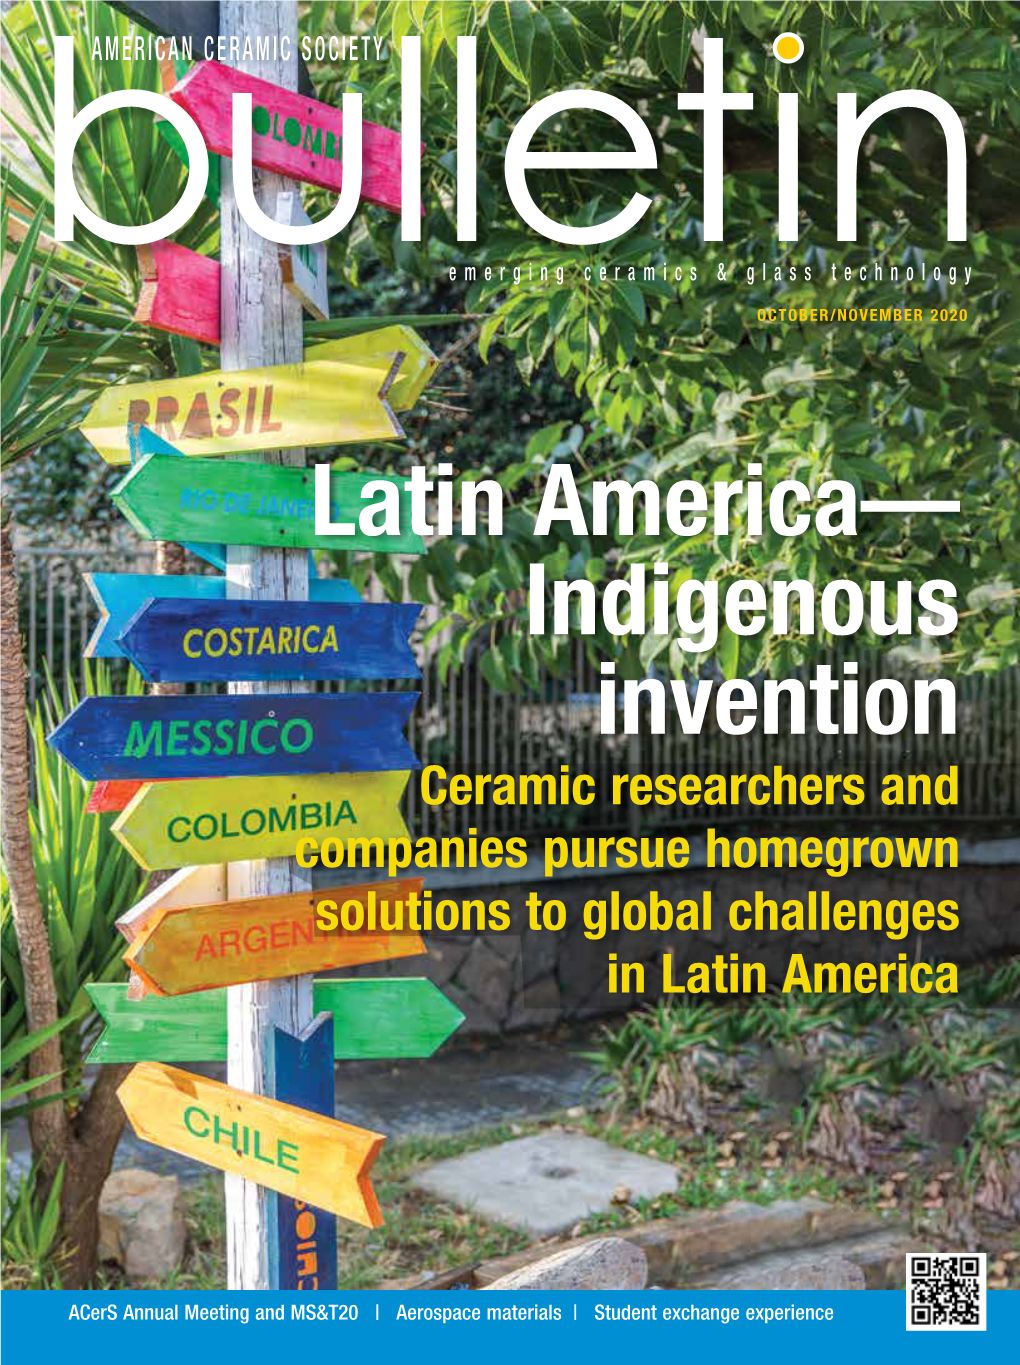 Latin America— Indigenous Invention Ceramic Researchers and Companies Pursue Homegrown Solutions to Global Challenges in Latin America